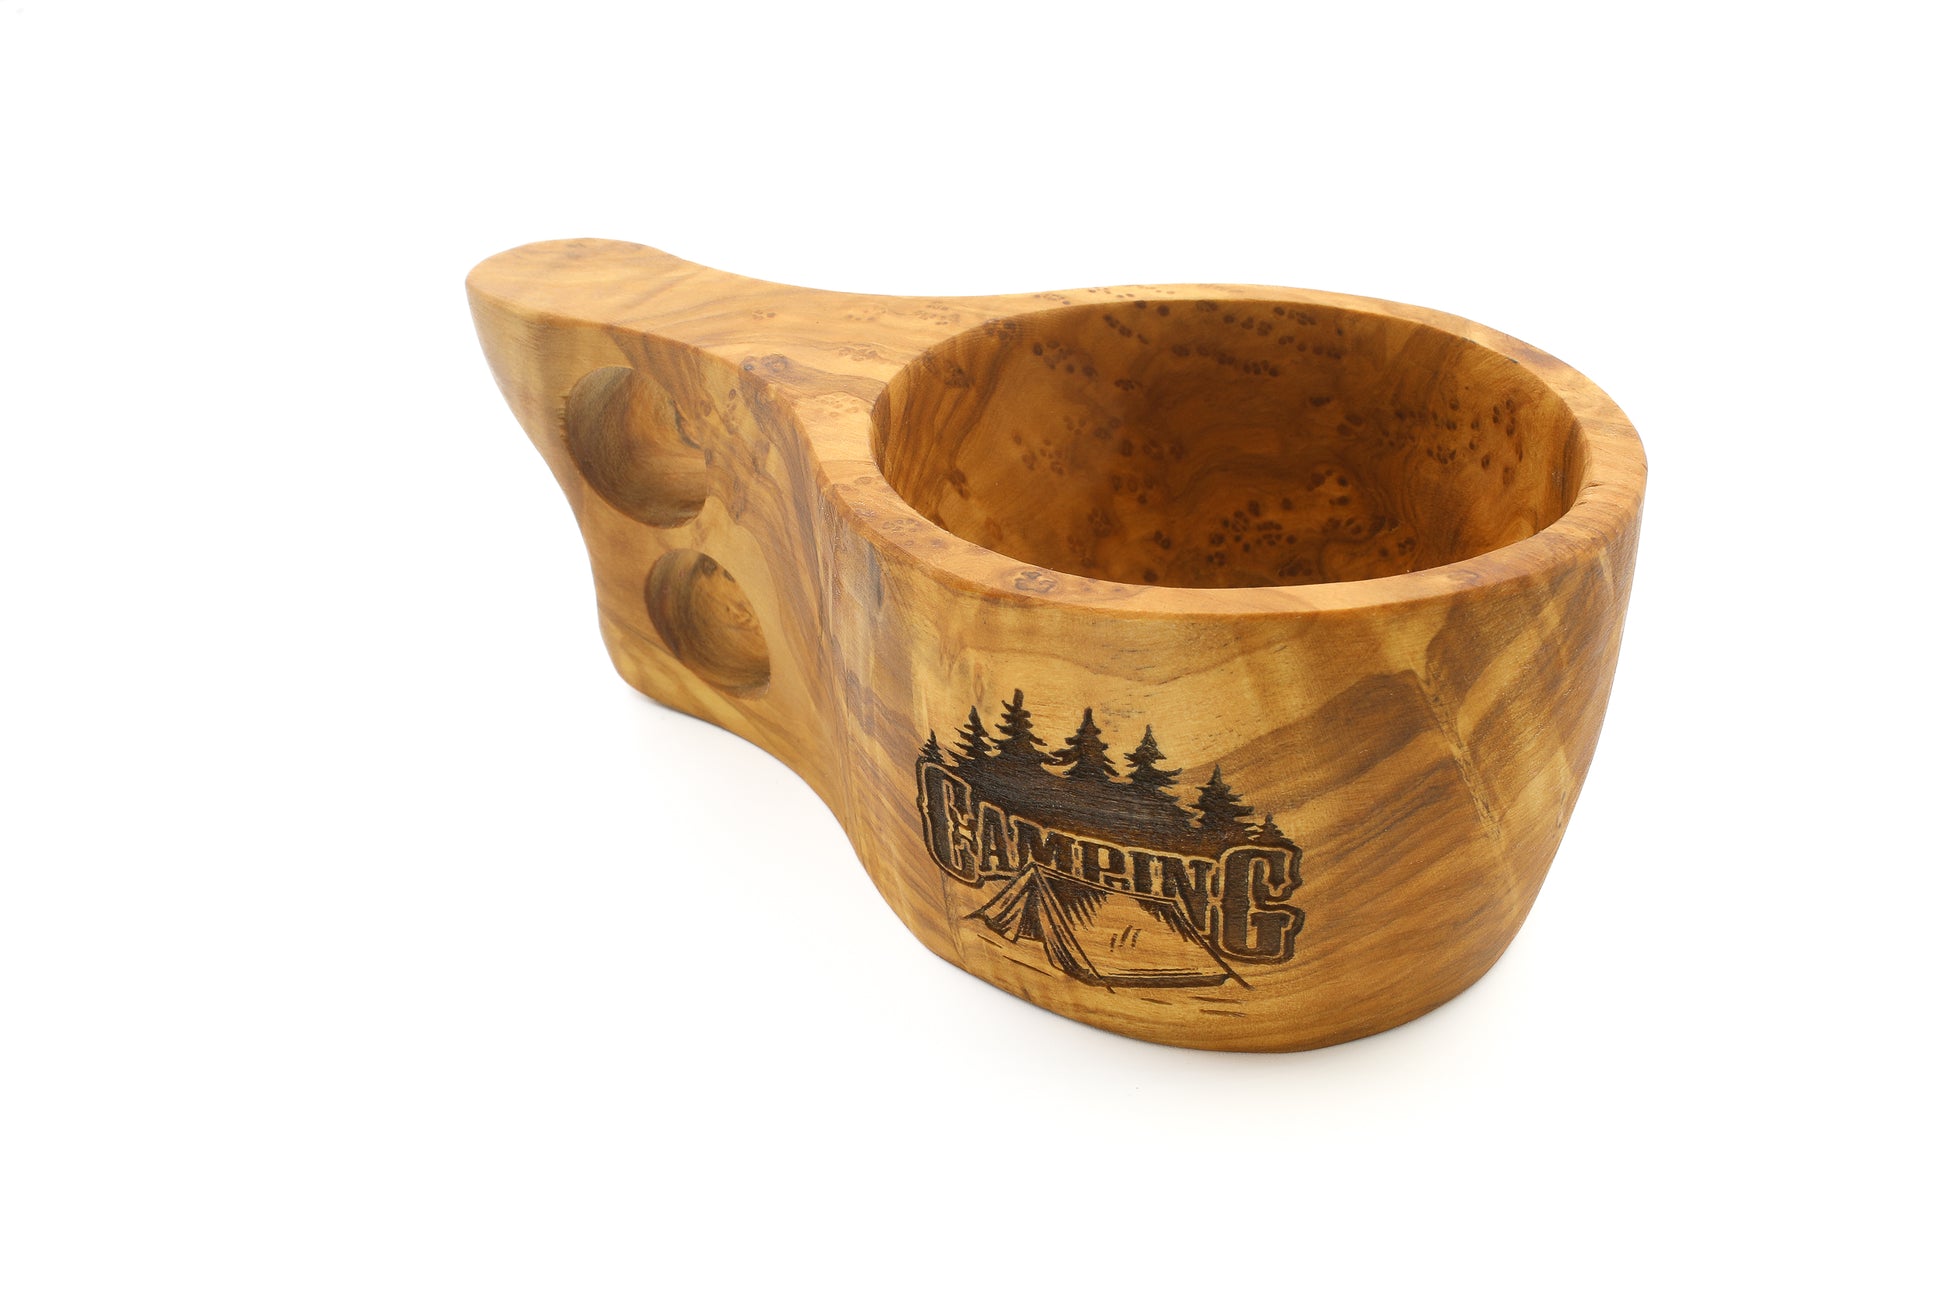 Olive wood cup with a traditional kuksa design